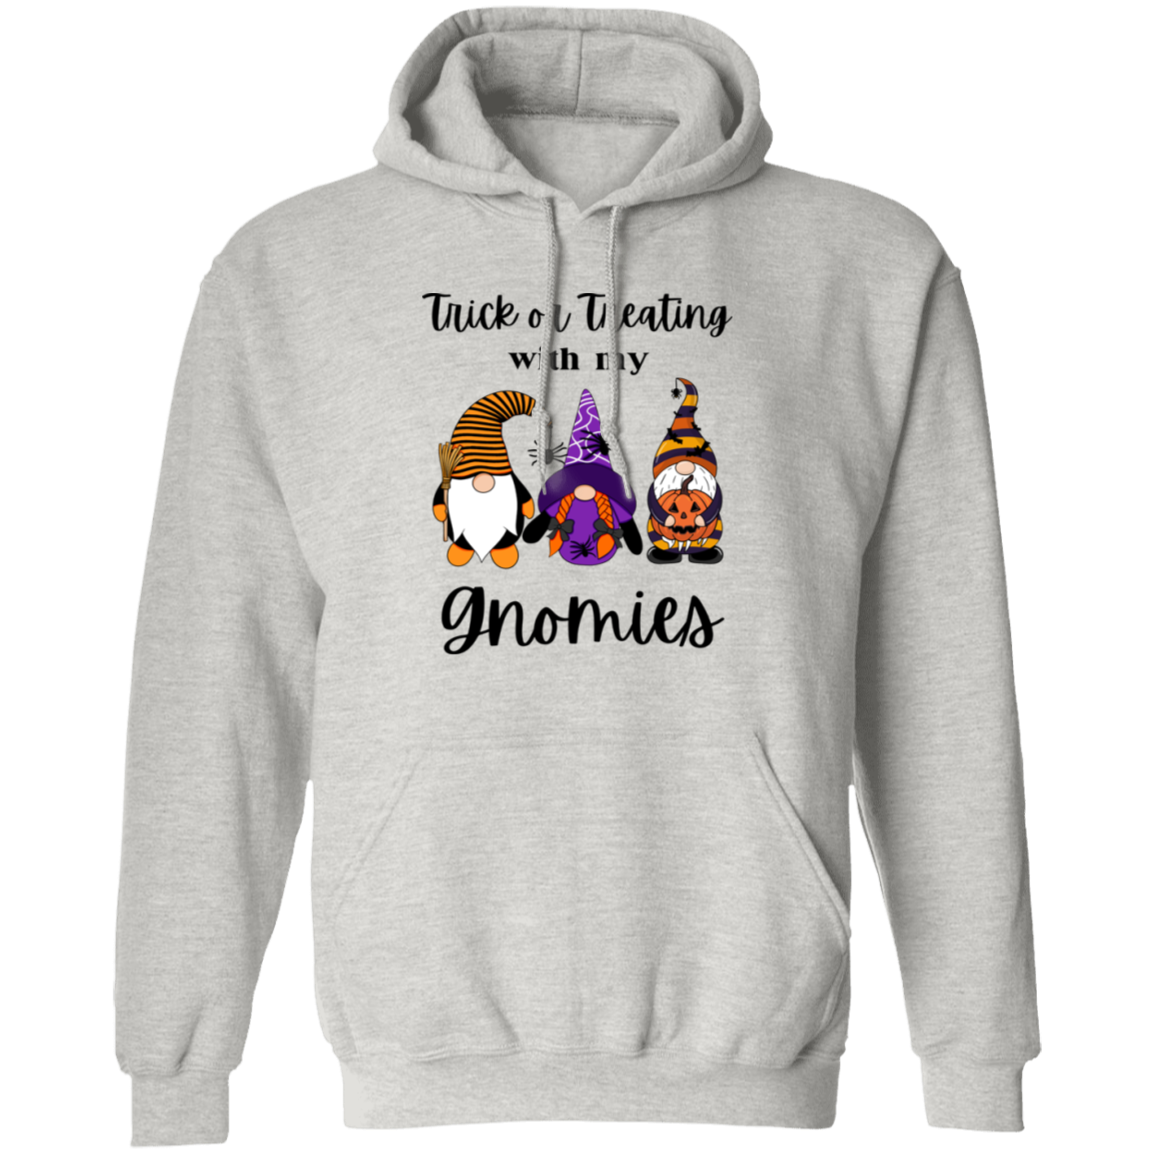 TRICK OR TREATING WITH MY GNOMIES Unisex Pullover Hoodie